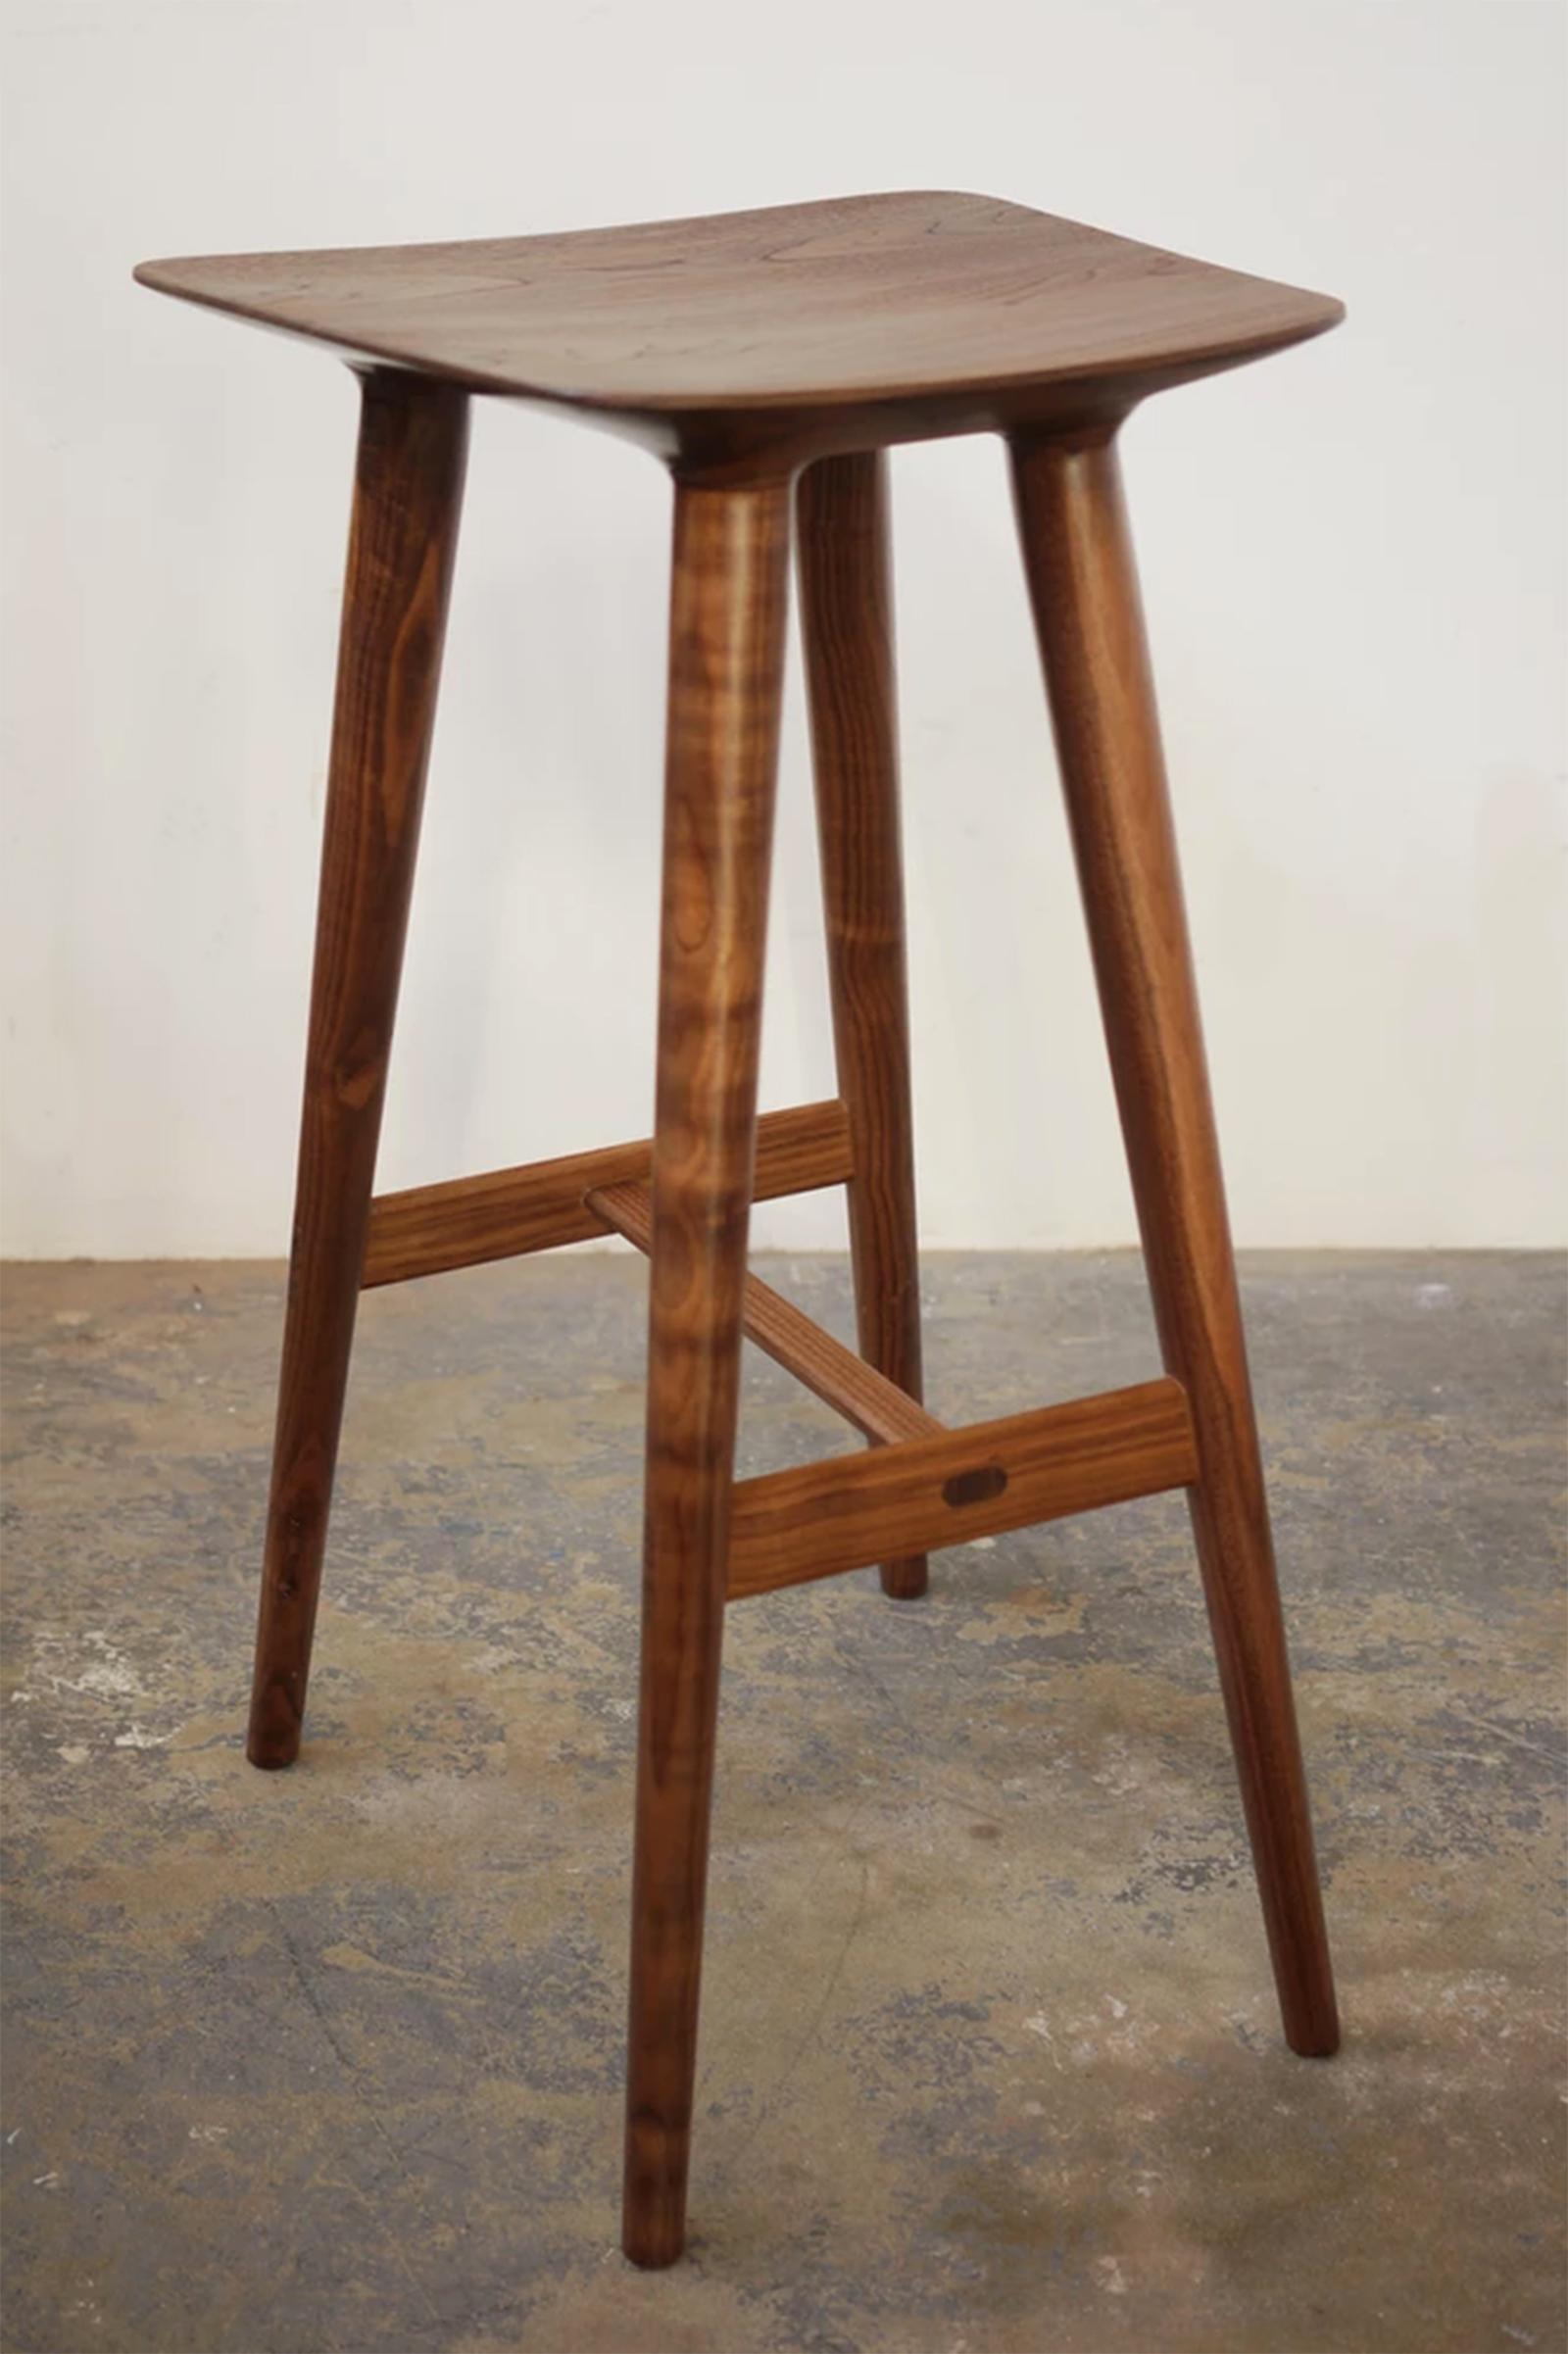 Contemporary Mantaray Counter Stool in Walnut Wood, Hand-Sculpted Stool by Kokora For Sale